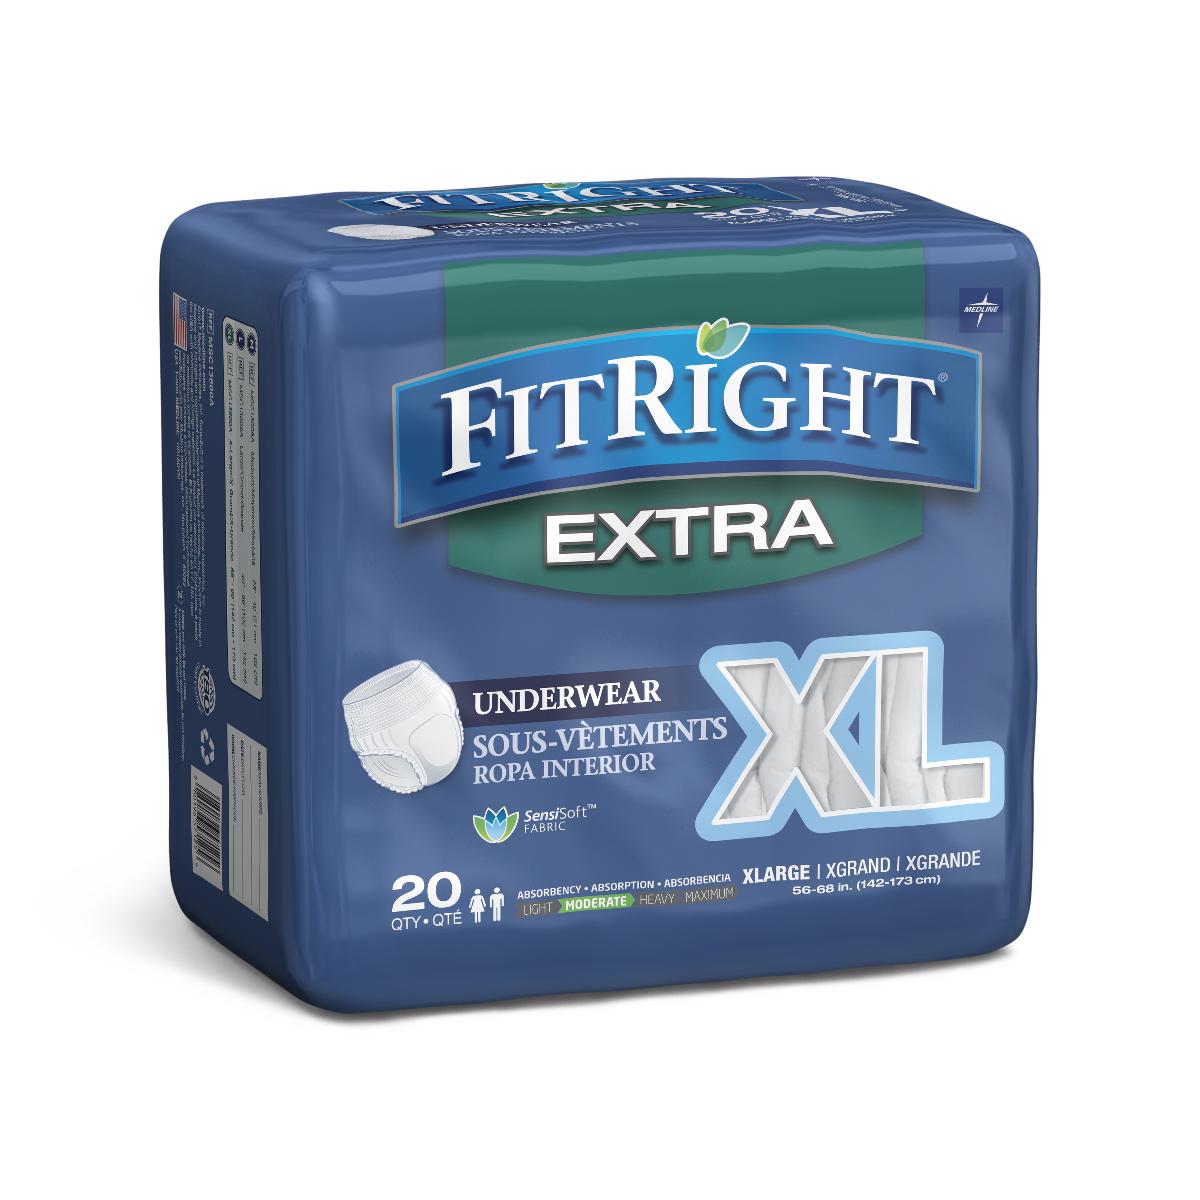 FitRight Extra-Protective Underwear,X-Large Bag of 20